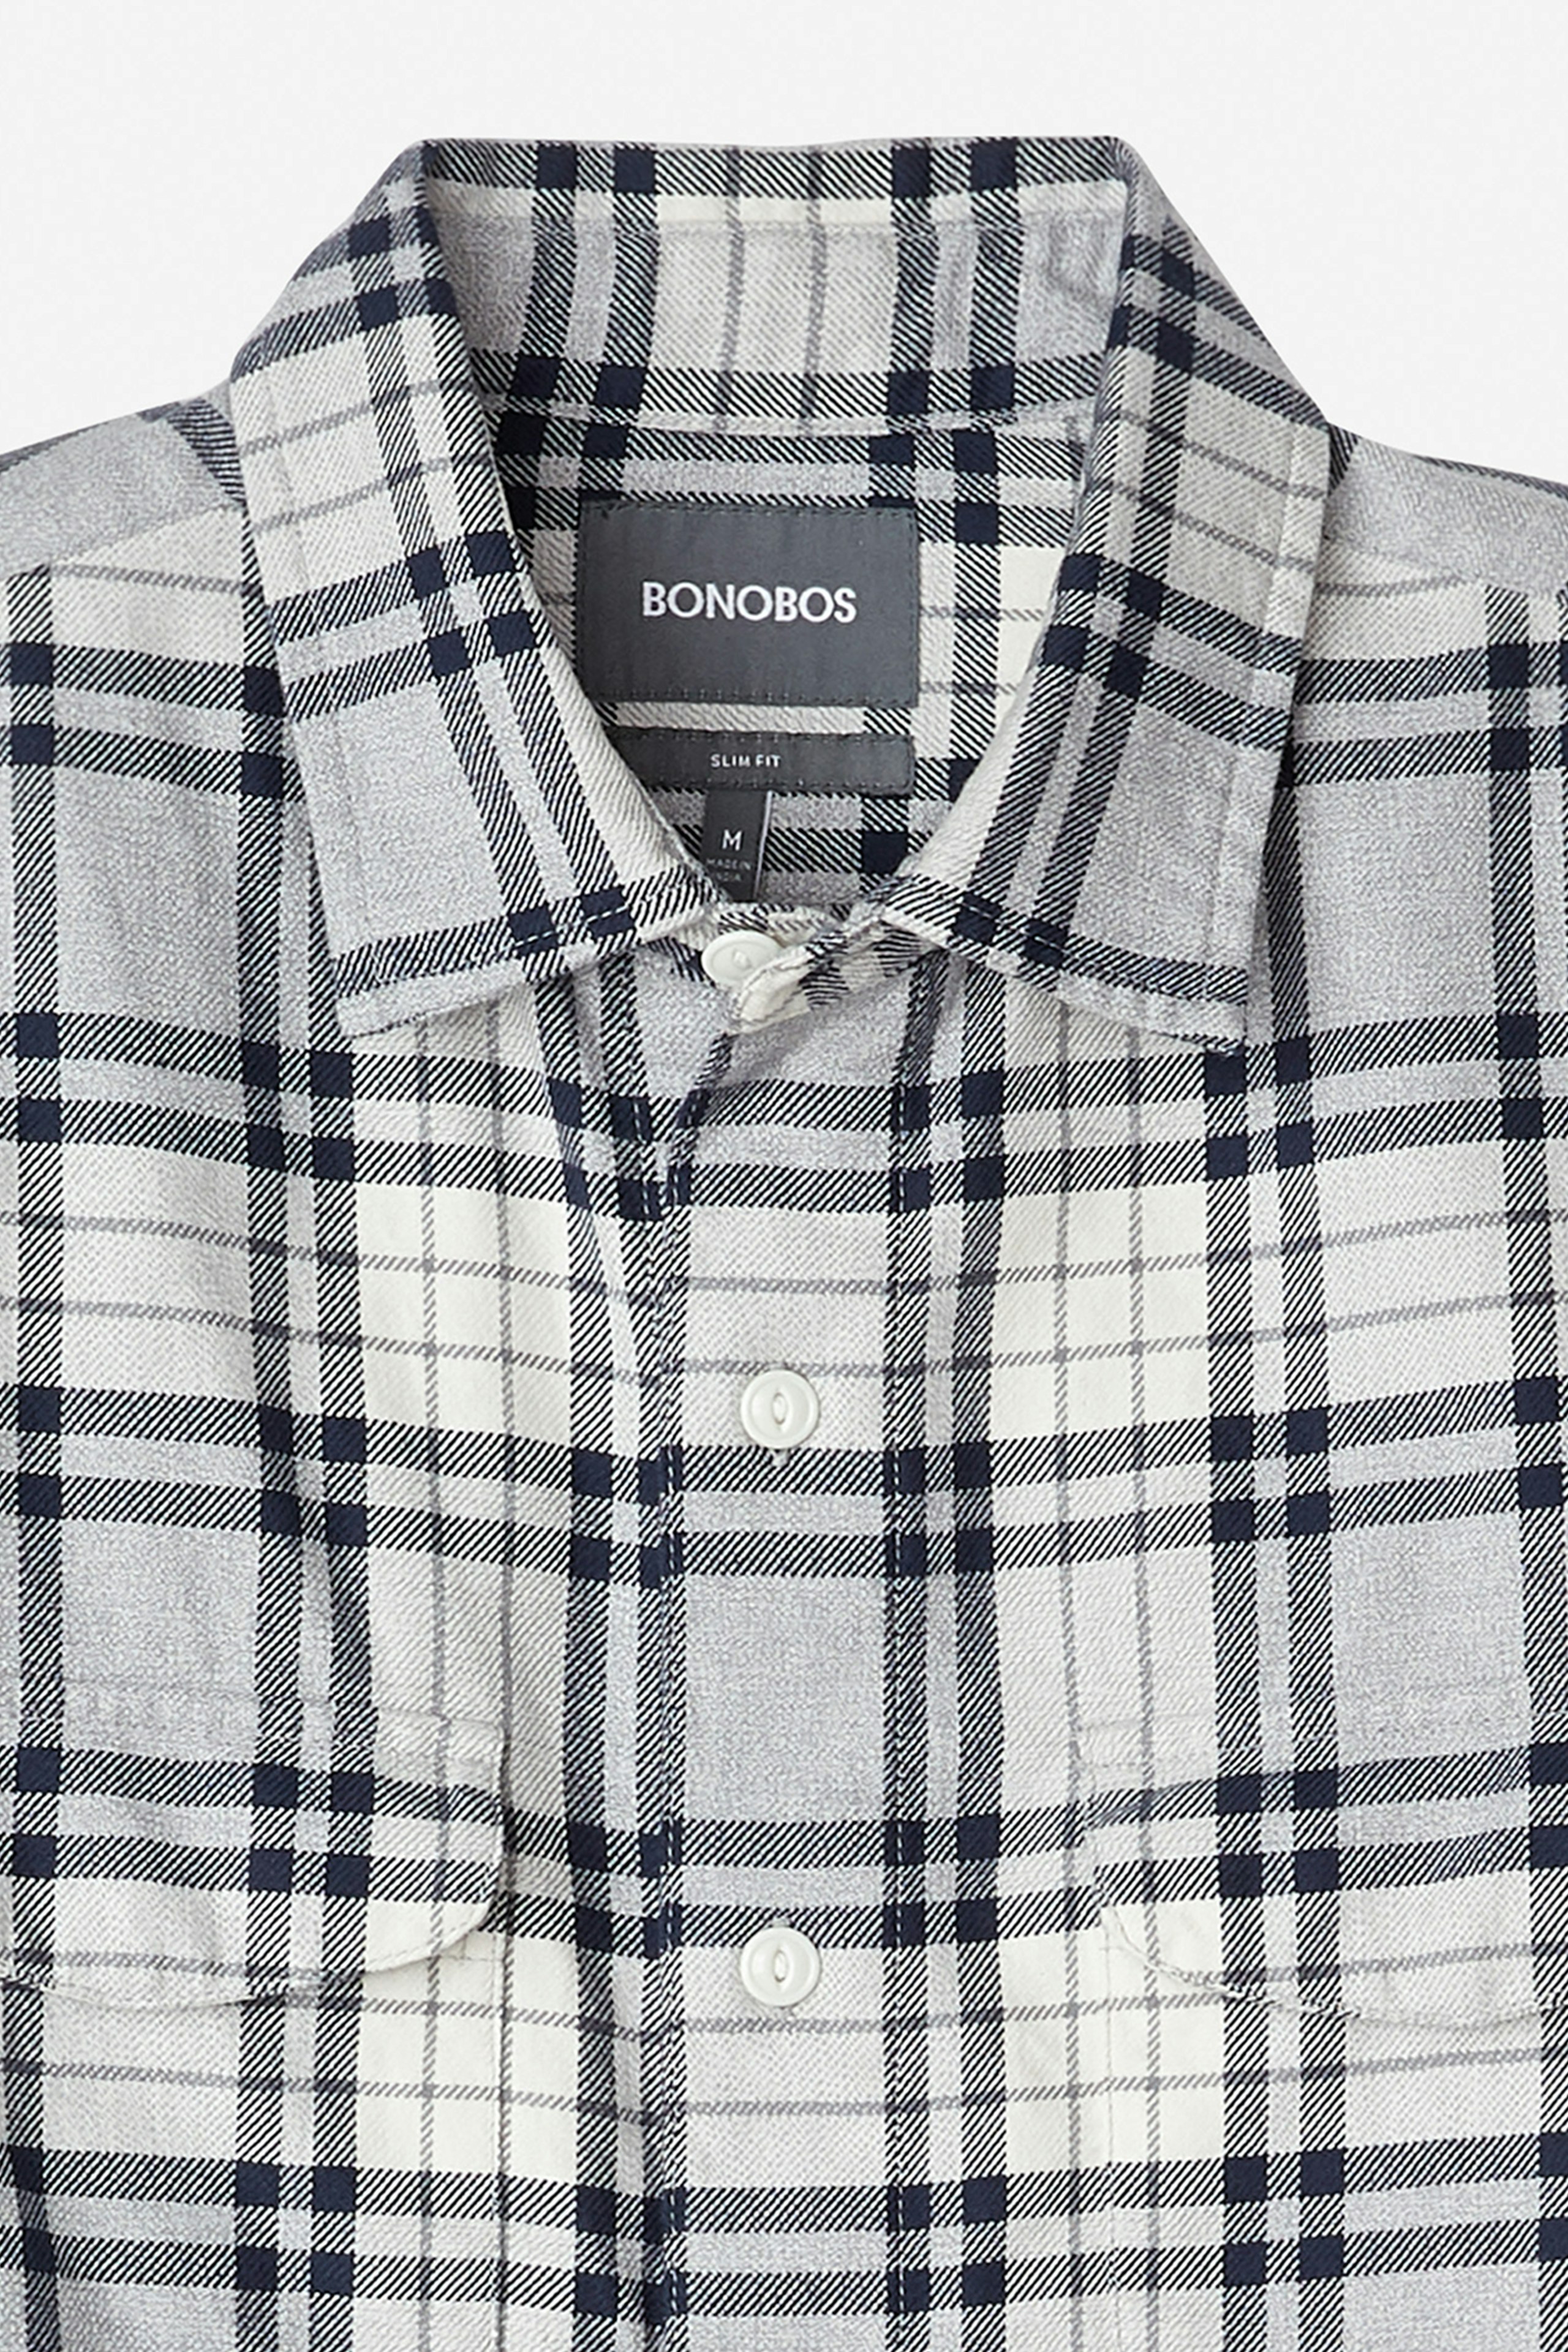 Flannel Shirt Extended Sizes